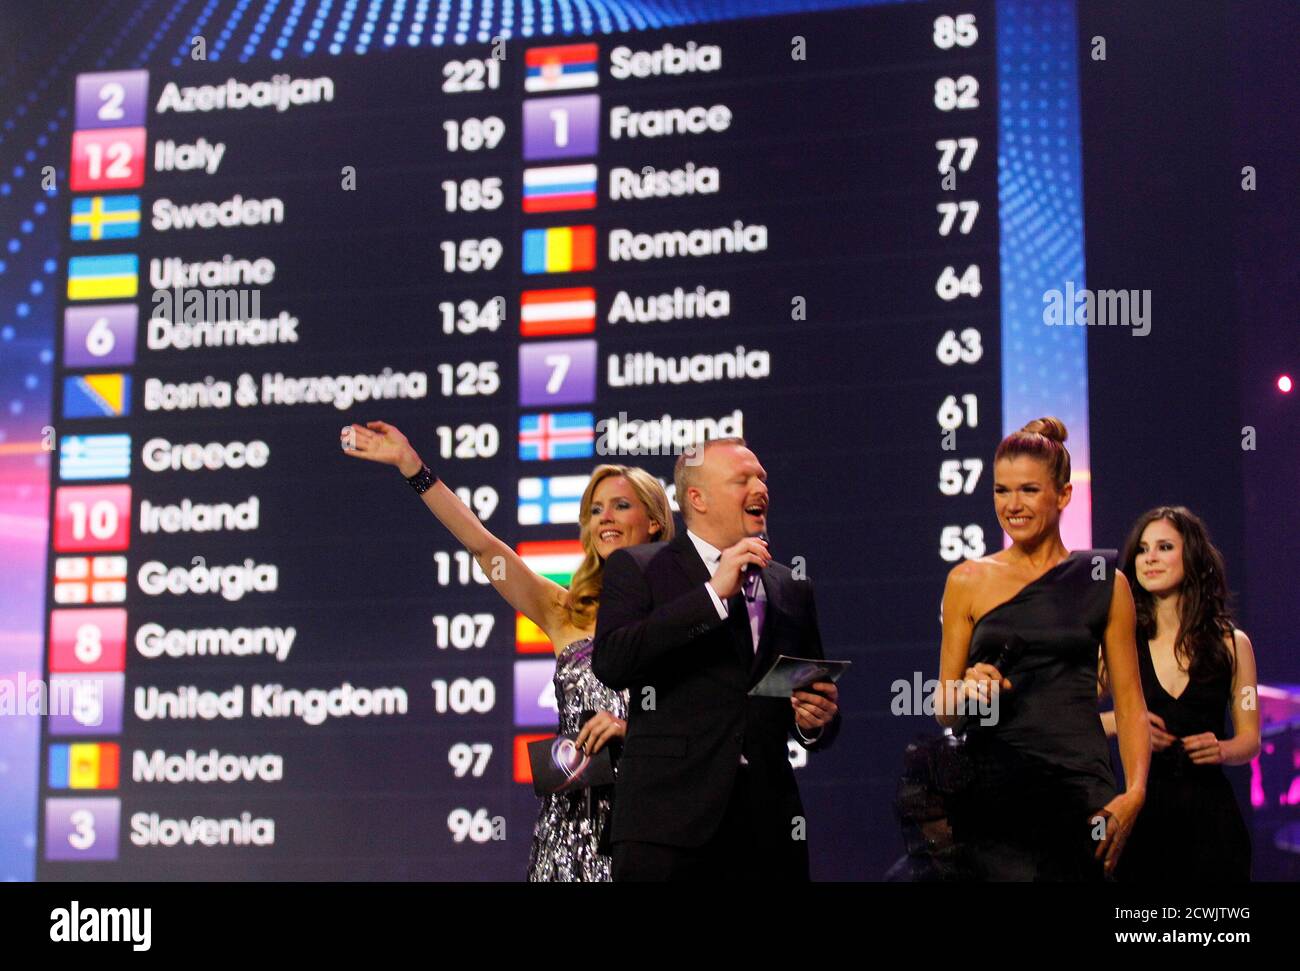 German TV entertainers and hosts of the Eurovision, Judith Rakers (L), Stefan Raab (2ndL), Anke Engelke and Lena (R) perform on stage during the Eurovision Song Contest final in Duesseldorf May 14, 2011.    REUTERS/Wolfgang Rattay (GERMANY  - Tags: ENTERTAINMENT) Stock Photo